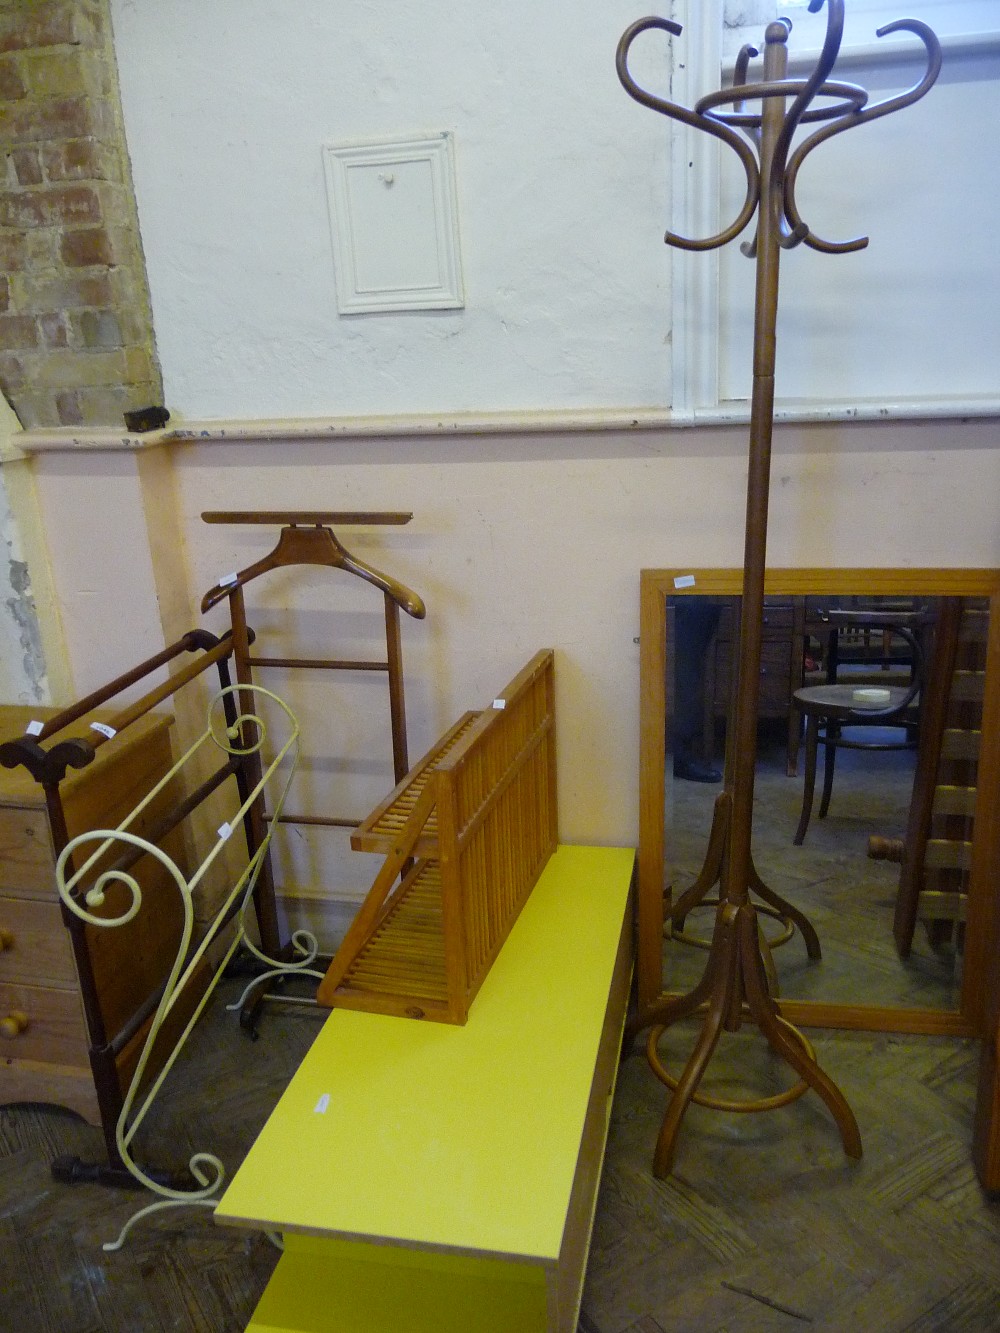 Two towel rails, a gentleman`s suit hanger, plate rack, retro coffee table, coat/hat stand and